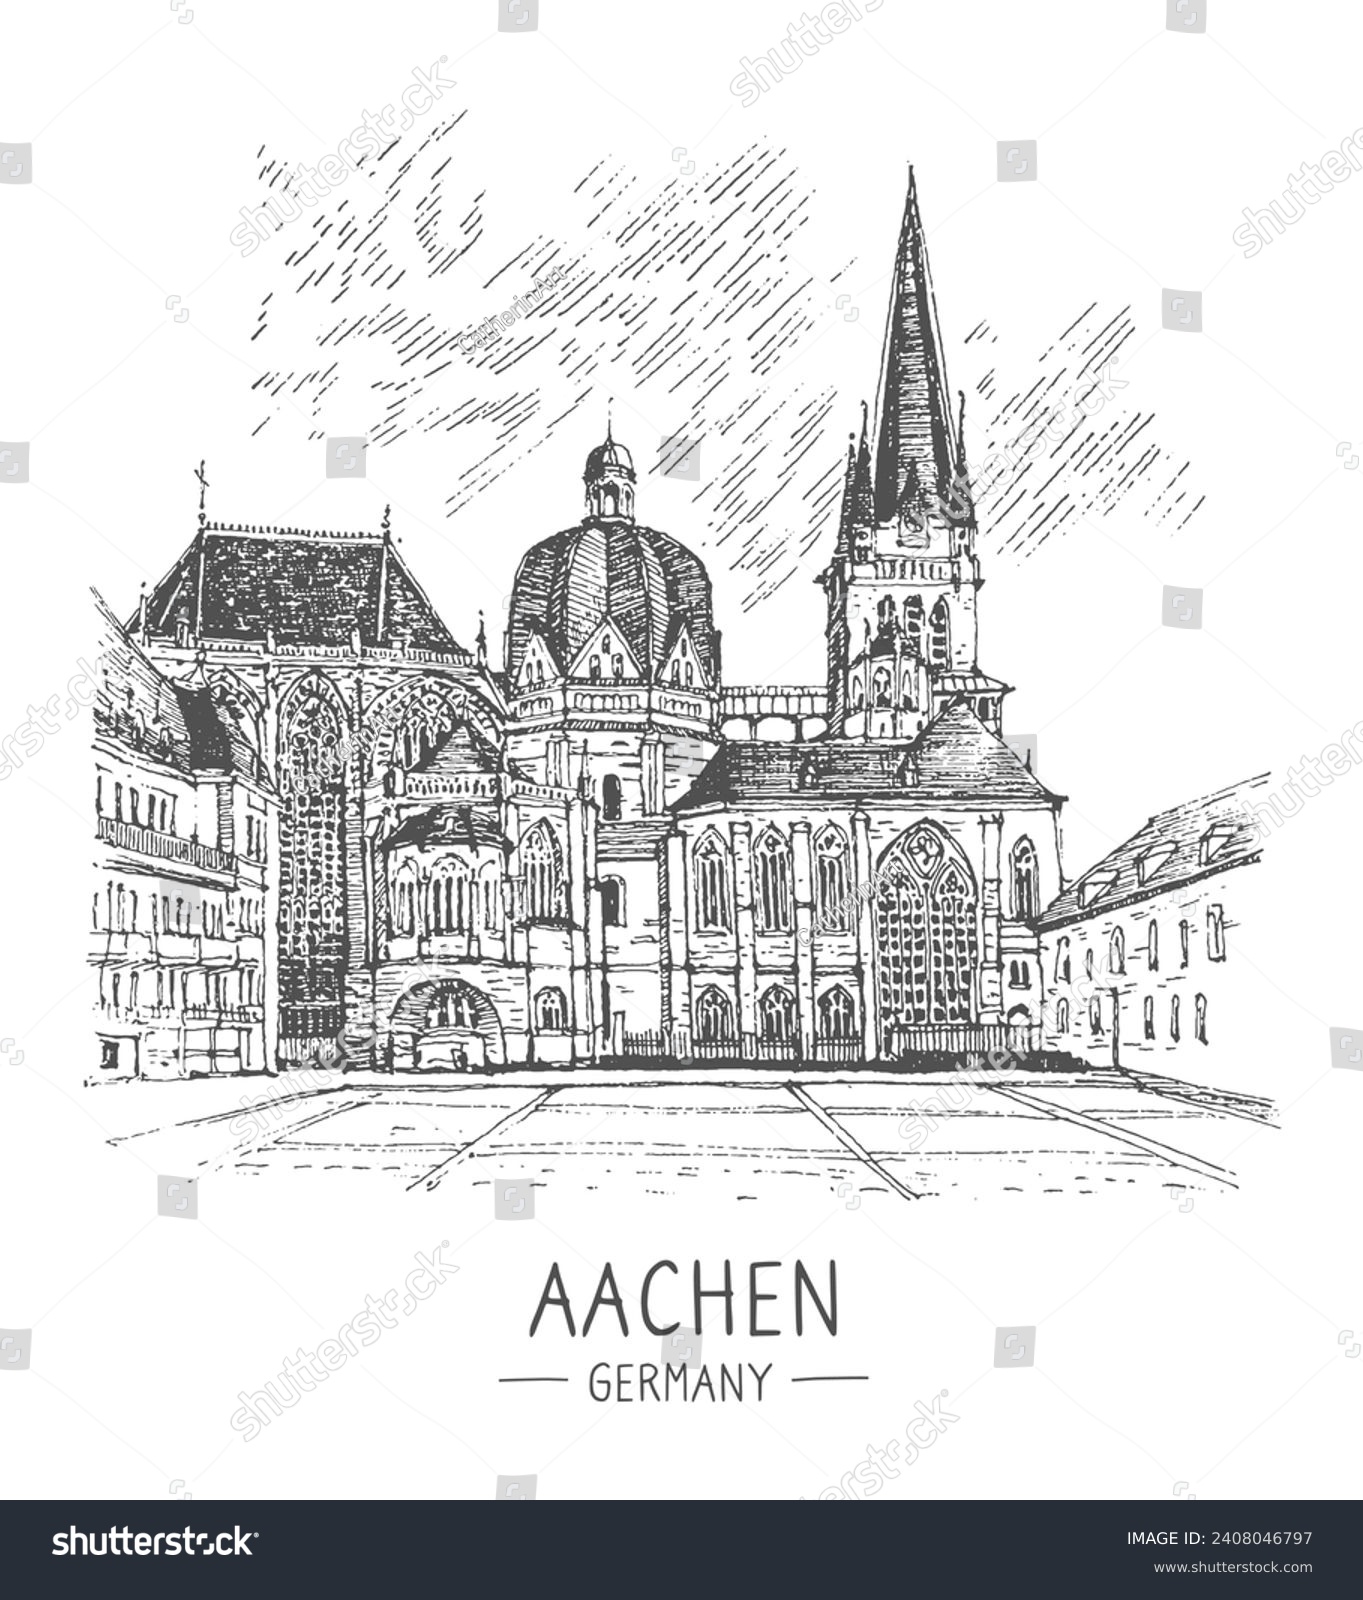 SVG of Travel sketch illustration of Aachen Cathedral, Germany. One of the oldest cathedrals in Europe, old town. Line art drawing, ink pen on paper. Hand drawn. Urban sketch, black color on white background svg